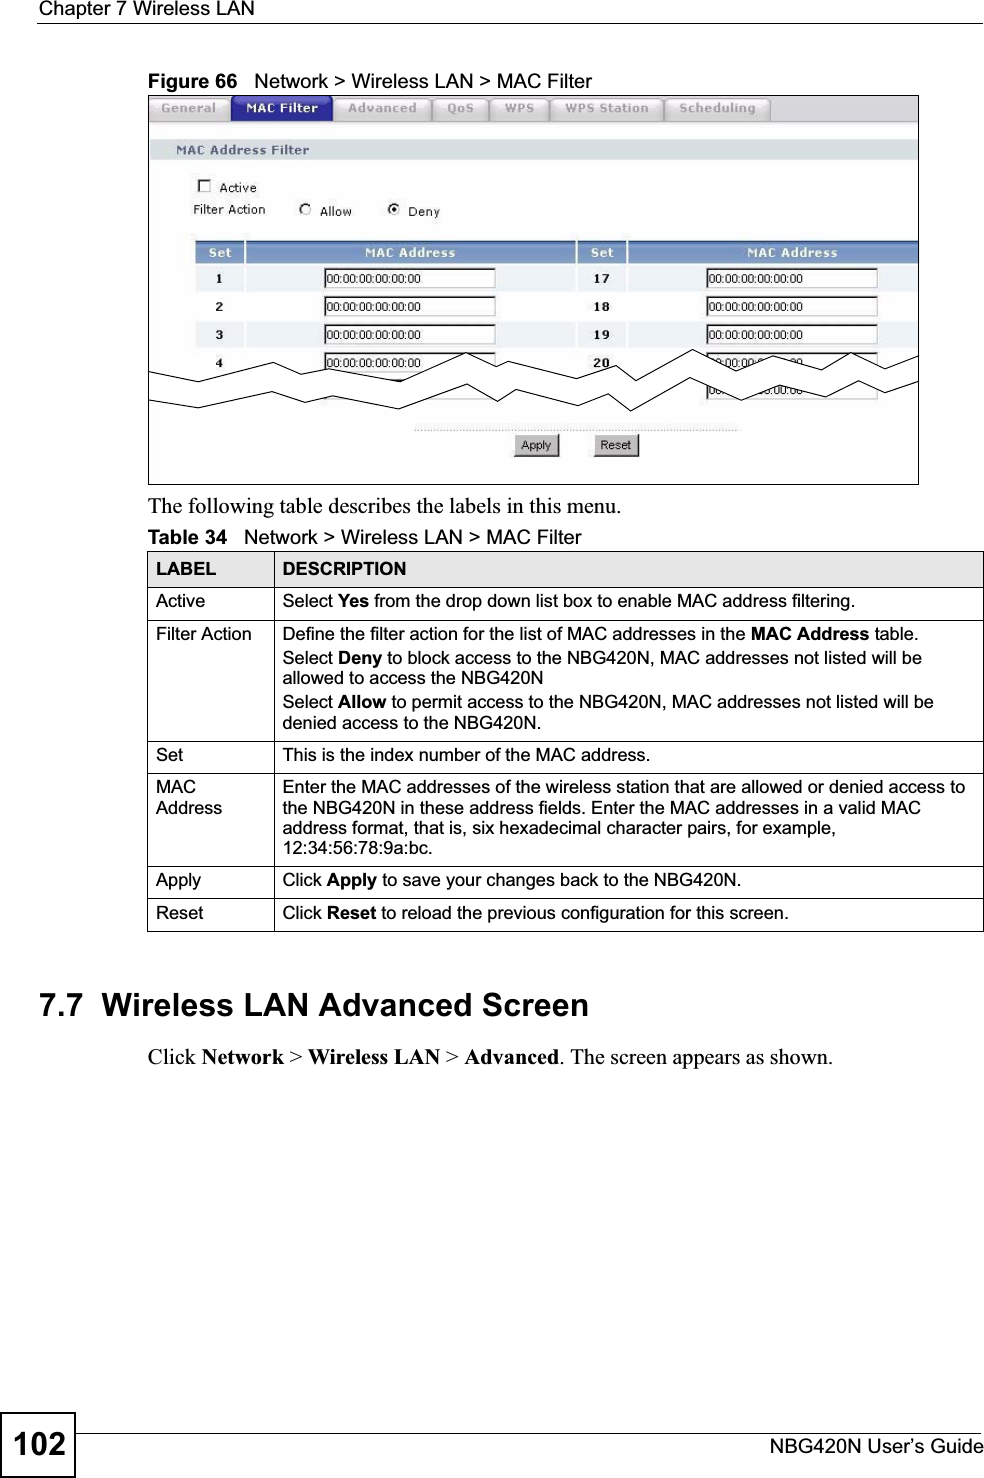 Chapter 7 Wireless LANNBG420N User’s Guide102Figure 66   Network &gt; Wireless LAN &gt; MAC FilterThe following table describes the labels in this menu.7.7  Wireless LAN Advanced ScreenClick Network &gt; Wireless LAN &gt; Advanced. The screen appears as shown.Table 34   Network &gt; Wireless LAN &gt; MAC FilterLABEL DESCRIPTIONActive Select Yes from the drop down list box to enable MAC address filtering.Filter Action  Define the filter action for the list of MAC addresses in the MAC Address table. Select Deny to block access to the NBG420N, MAC addresses not listed will be allowed to access the NBG420N Select Allow to permit access to the NBG420N, MAC addresses not listed will be denied access to the NBG420N. Set This is the index number of the MAC address.MAC AddressEnter the MAC addresses of the wireless station that are allowed or denied access to the NBG420N in these address fields. Enter the MAC addresses in a valid MAC address format, that is, six hexadecimal character pairs, for example, 12:34:56:78:9a:bc.Apply Click Apply to save your changes back to the NBG420N.Reset Click Reset to reload the previous configuration for this screen.